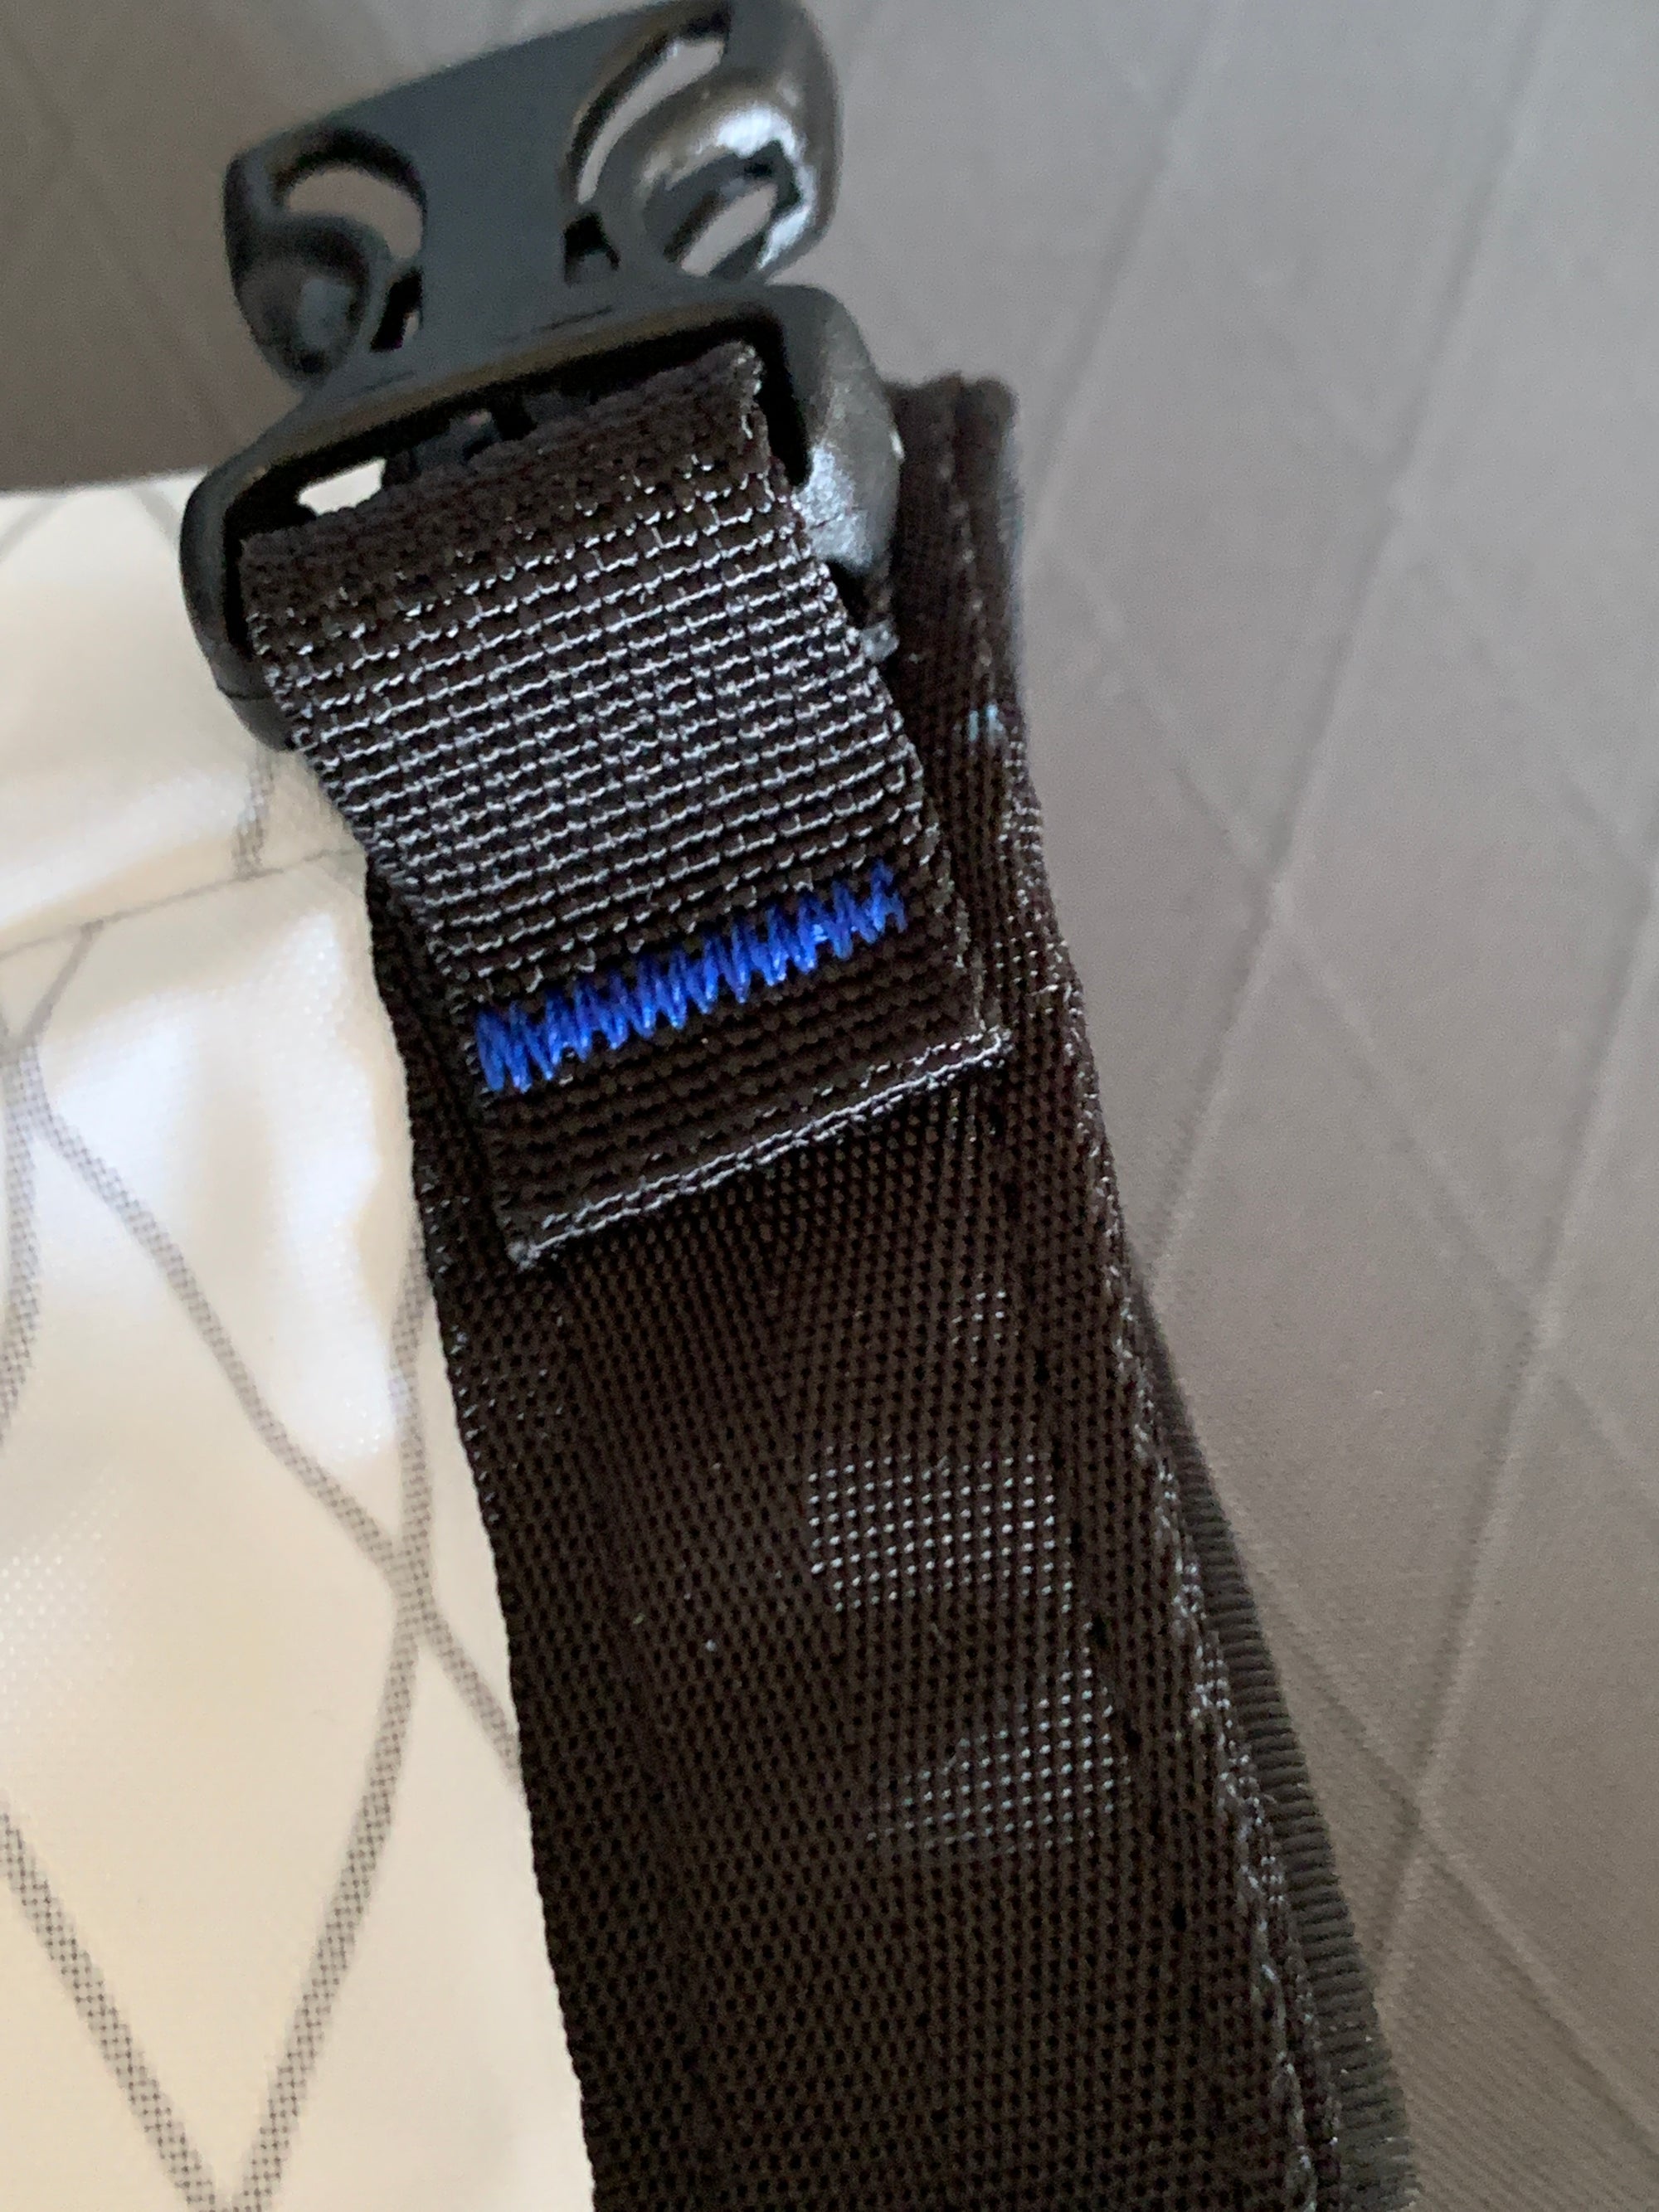 How to Fix Backpack Strap Adjuster? (Repair Guide) 